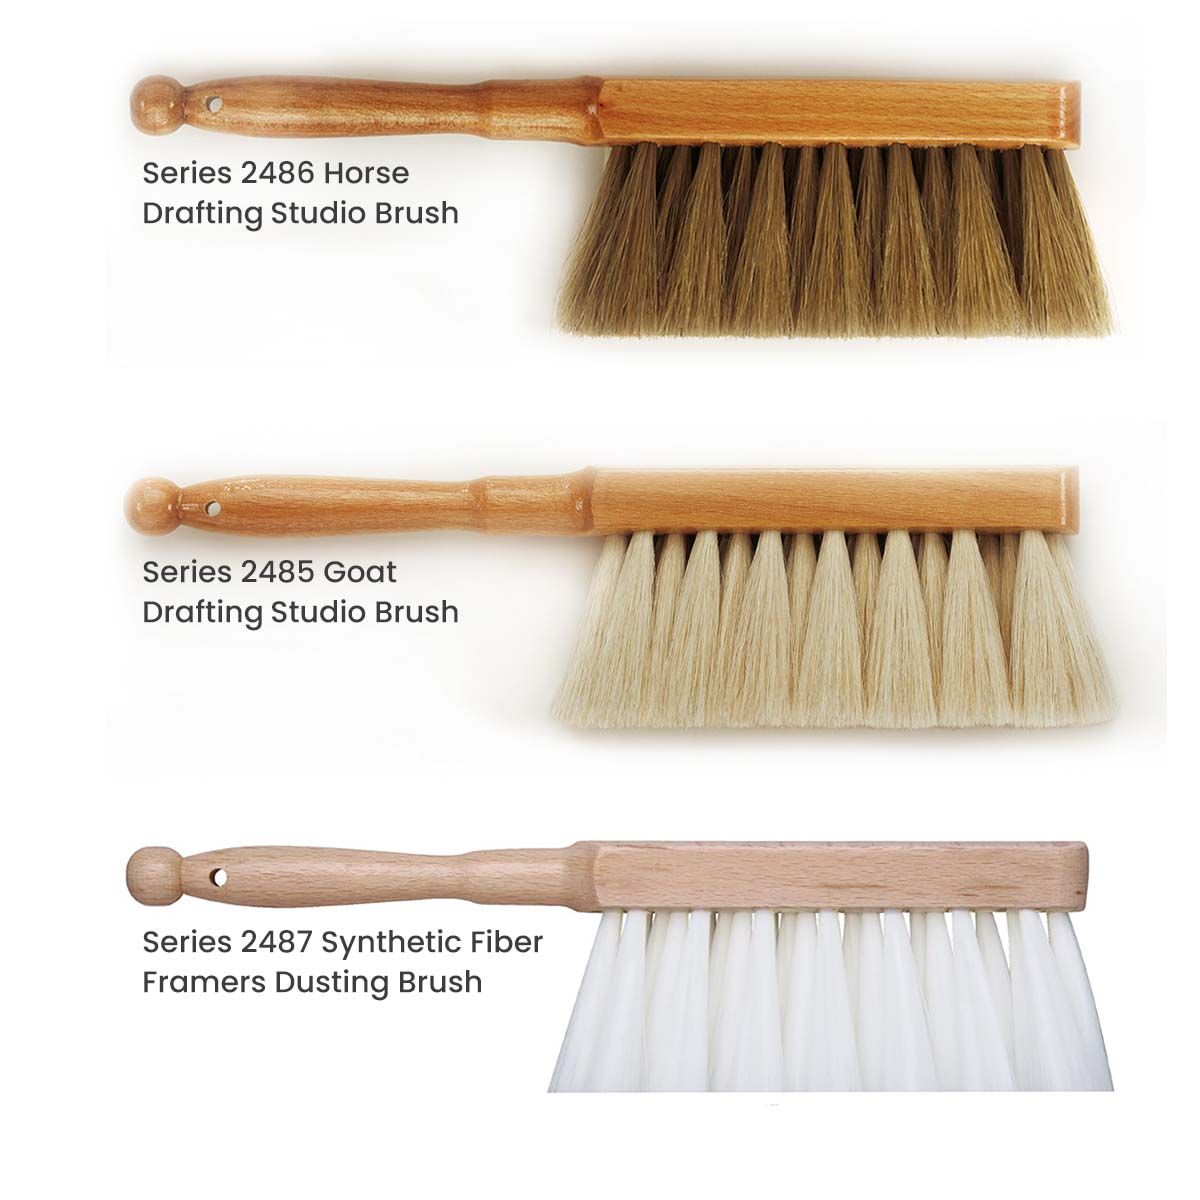 Drafting Brush from Smart - Diqqa